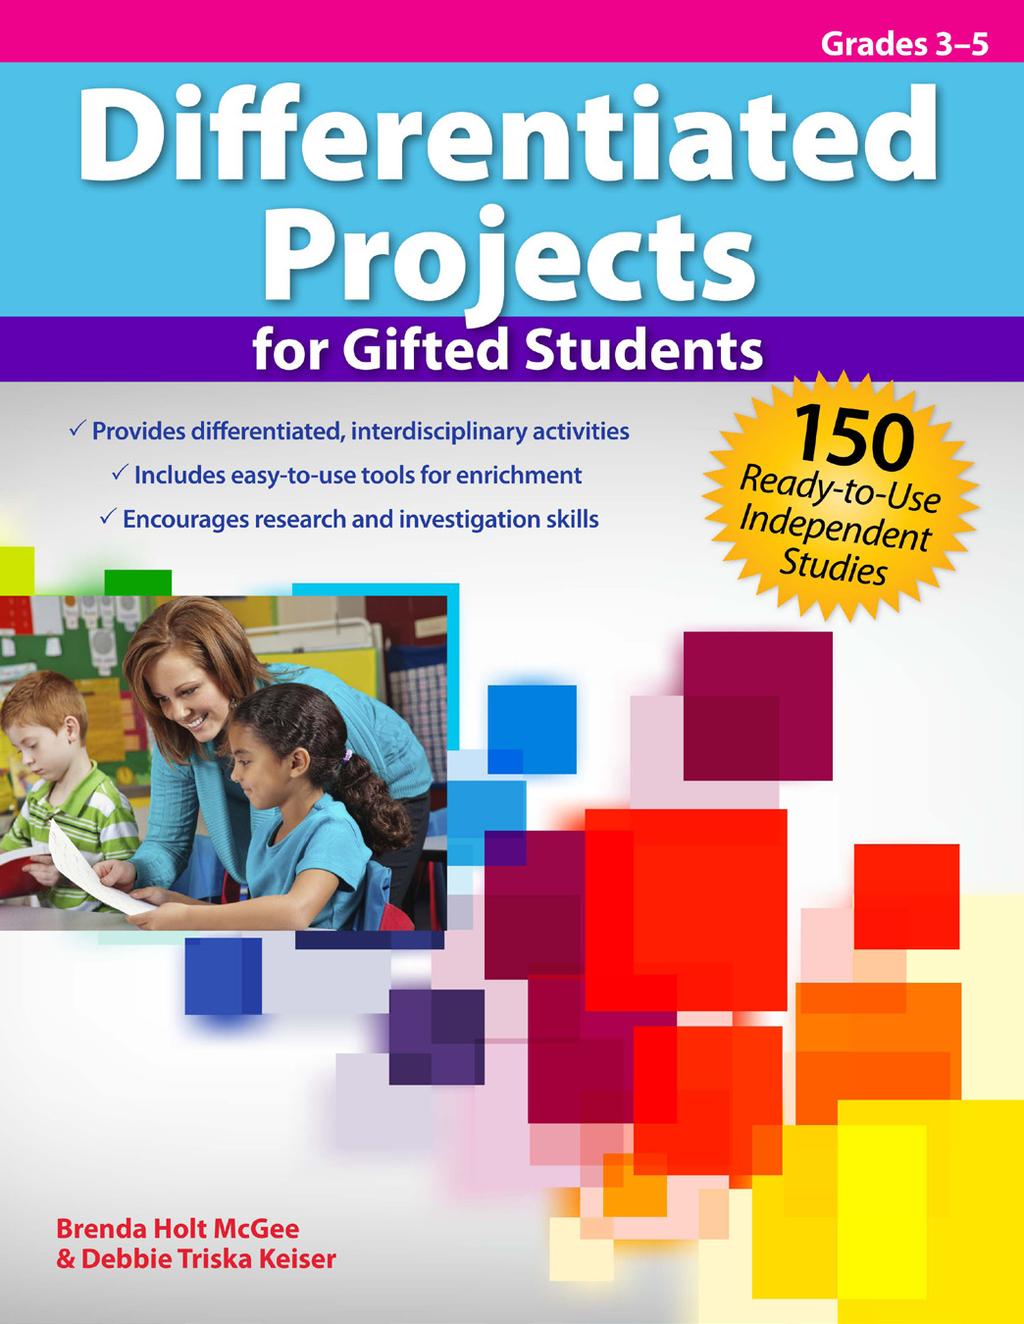 Ready-to-Use Independent Studies by Brenda Holt